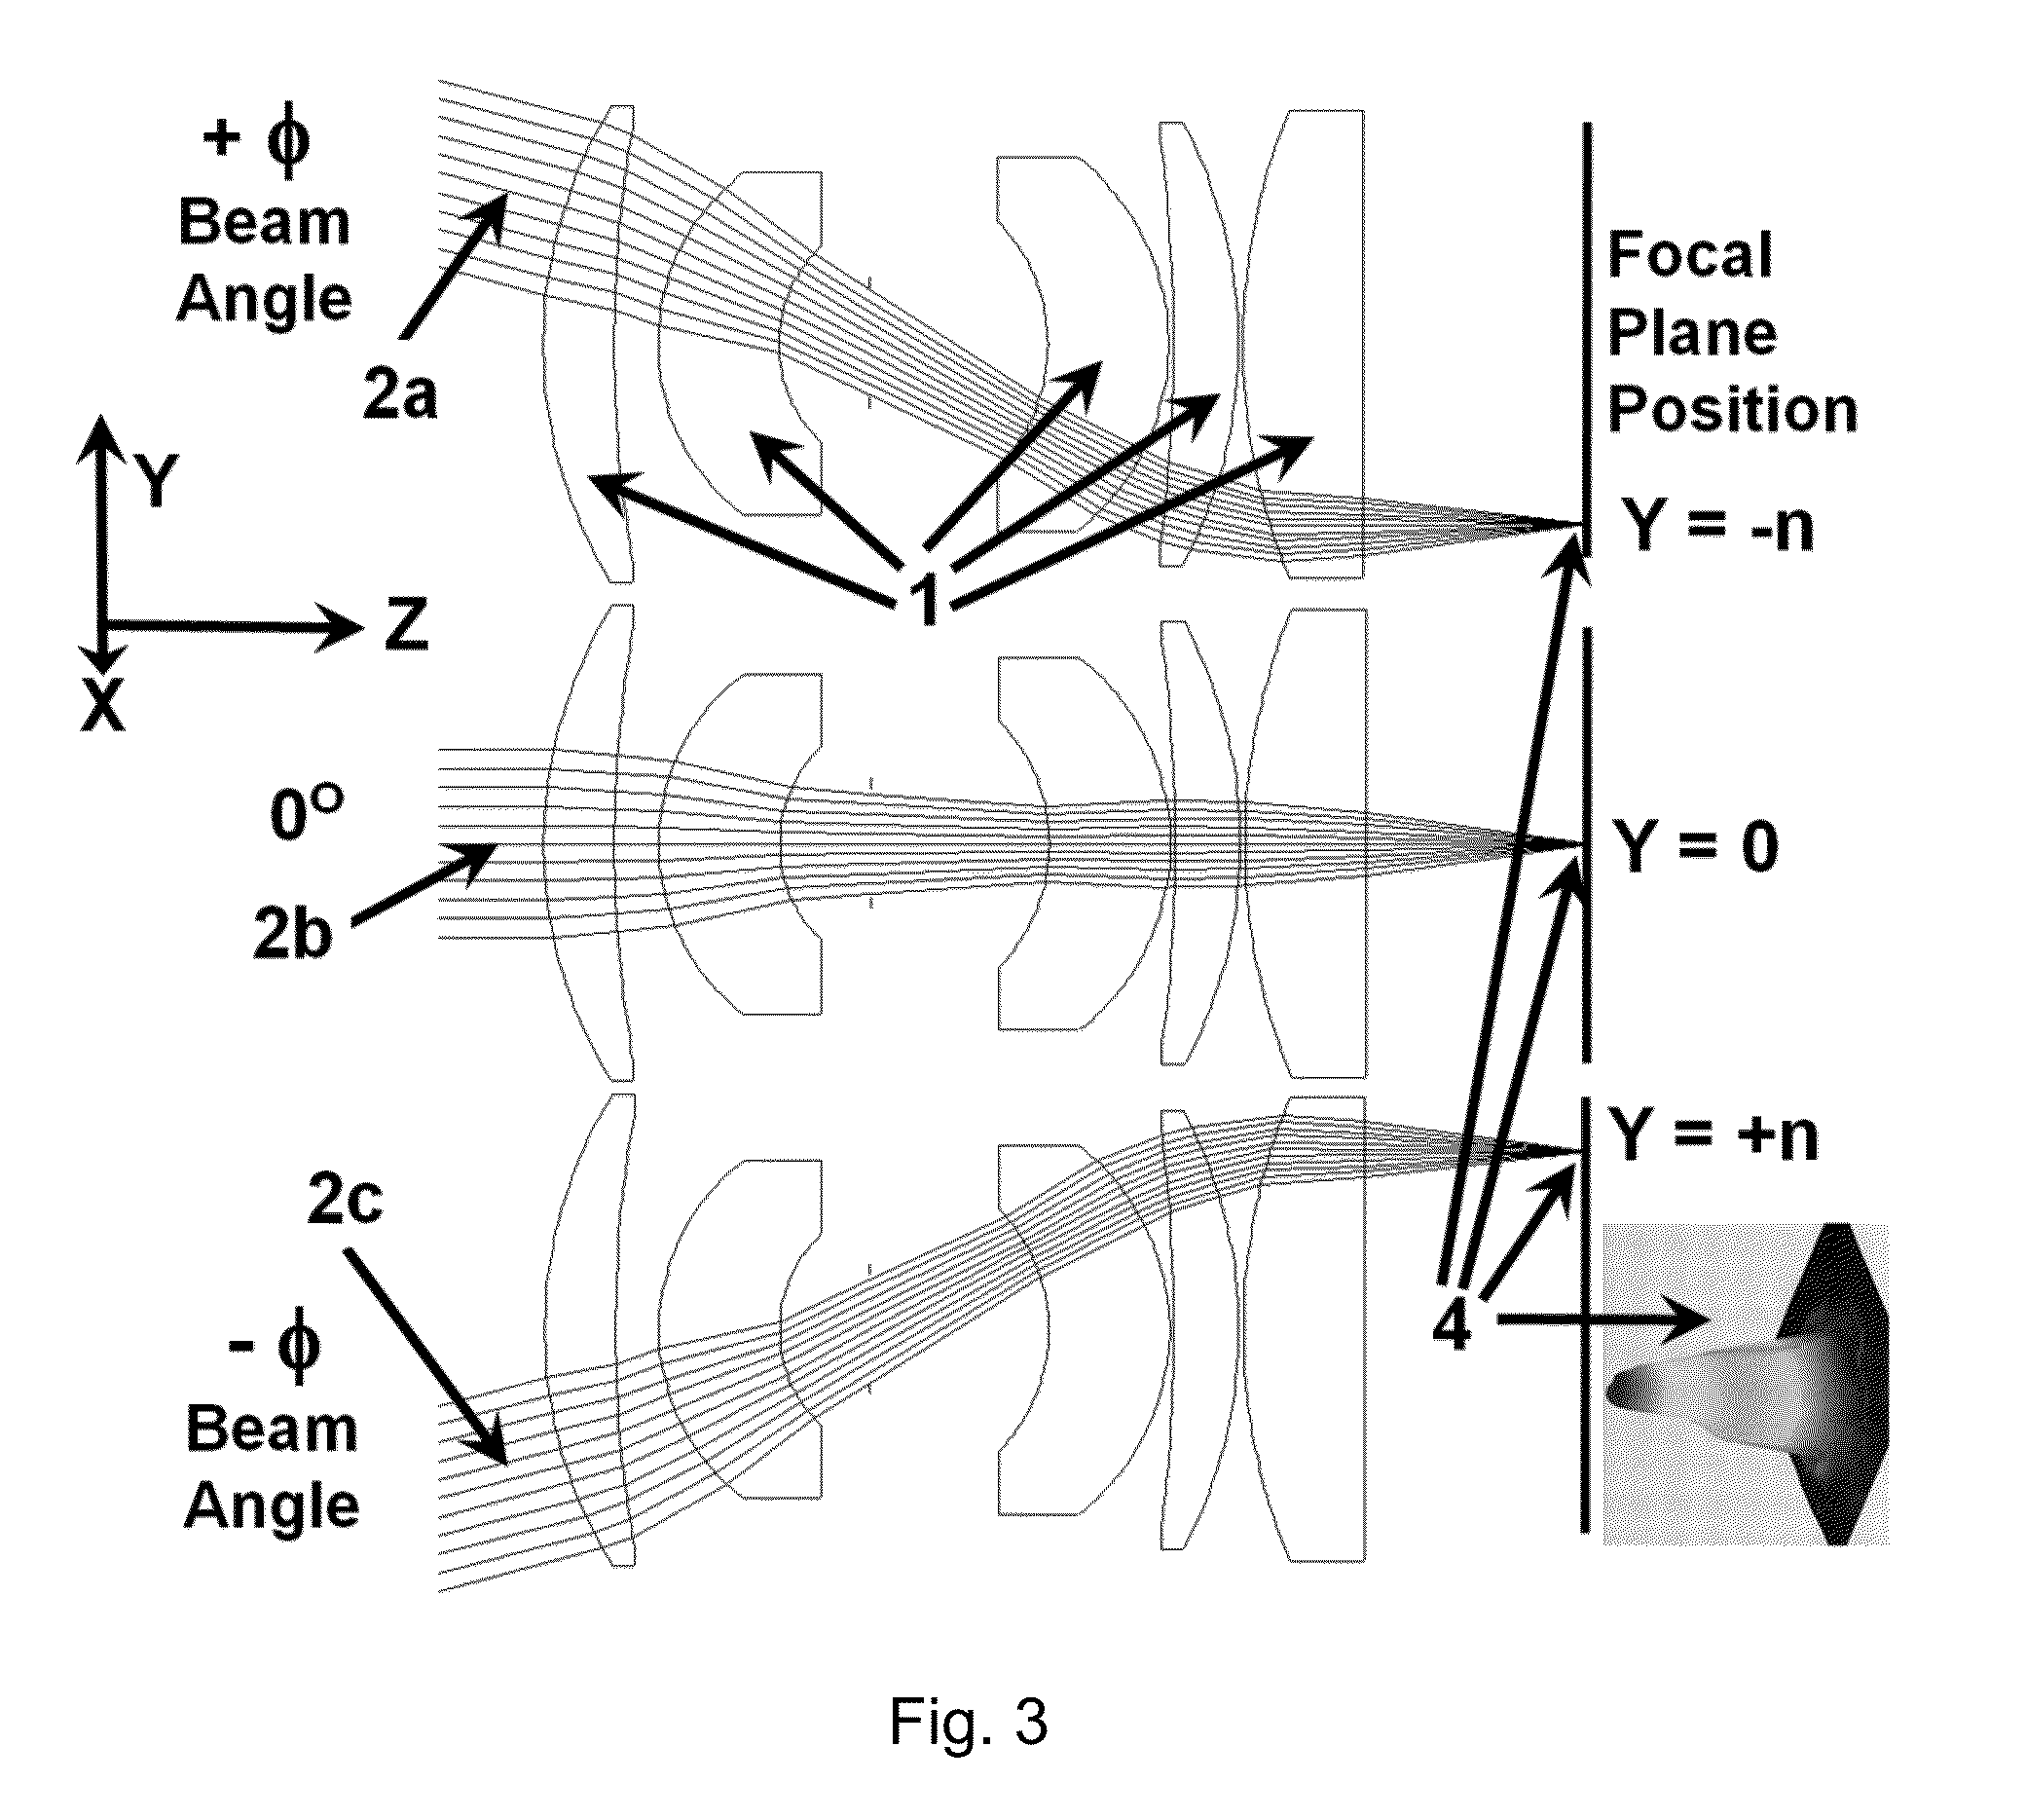 Acquisition, Tracking, and Pointing Apparatus for Free Space Optical Communications with Moving Focal Plane Array